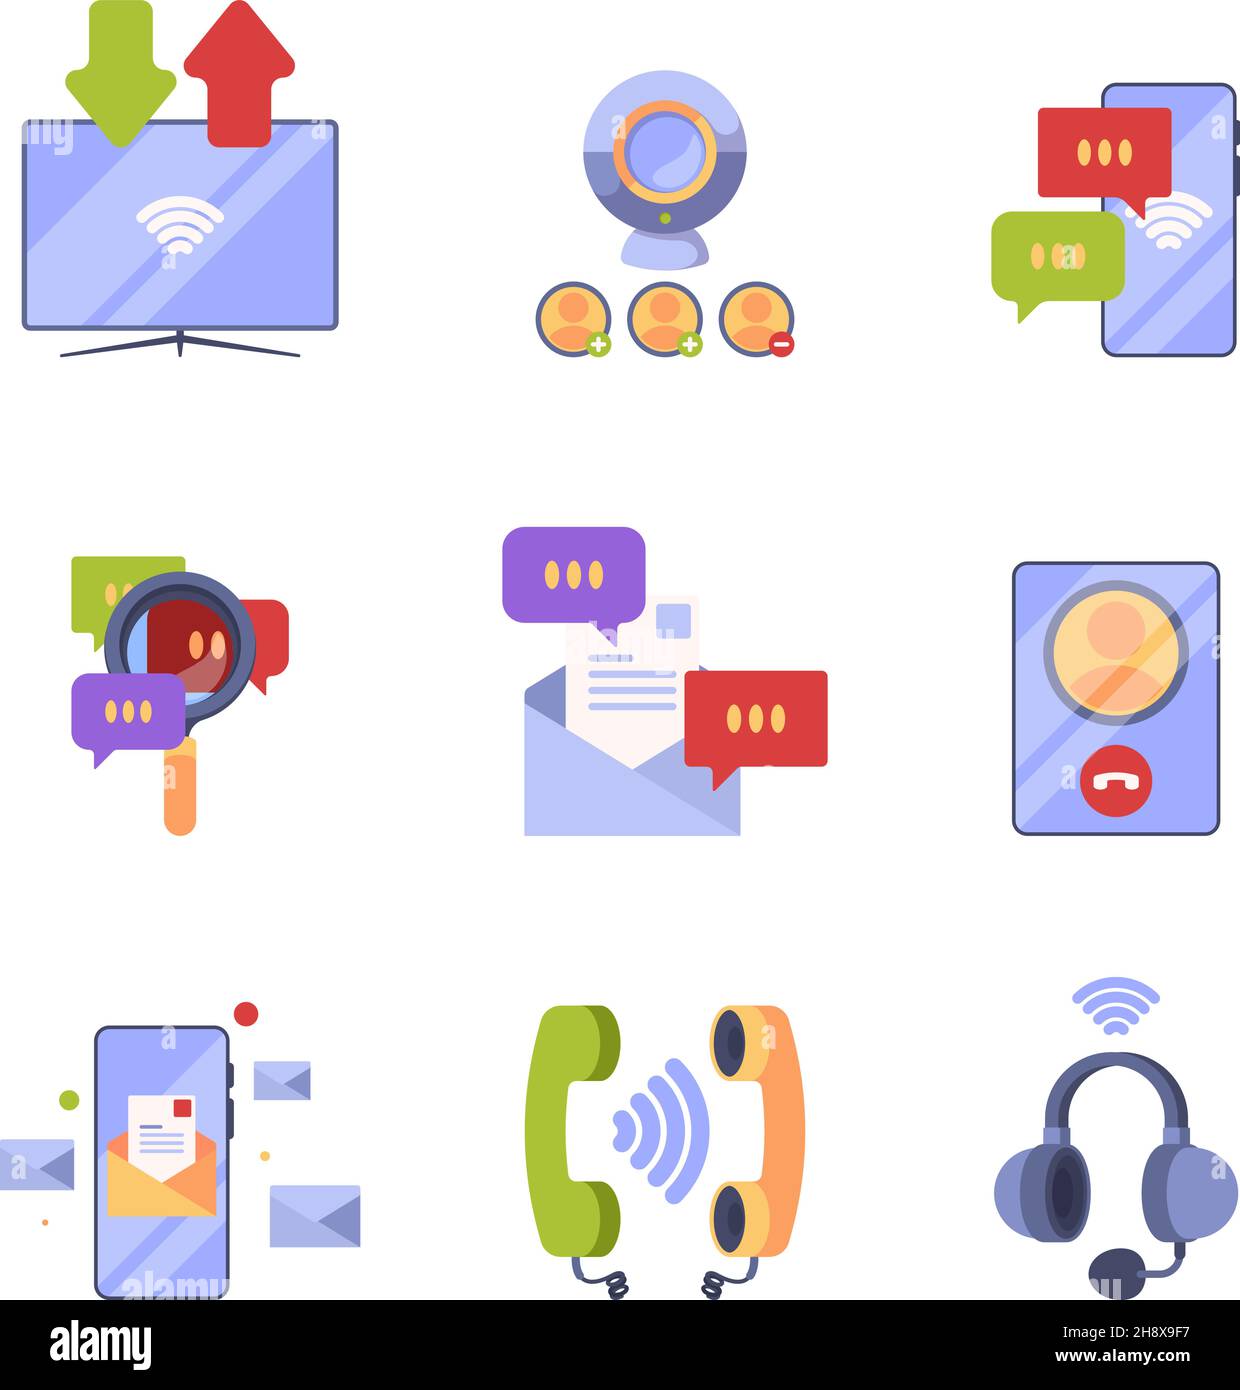 Online communication. Ads icon set concept pictures of internet dialogue web conversation and banking symbols for app developed garish vector design Stock Vector